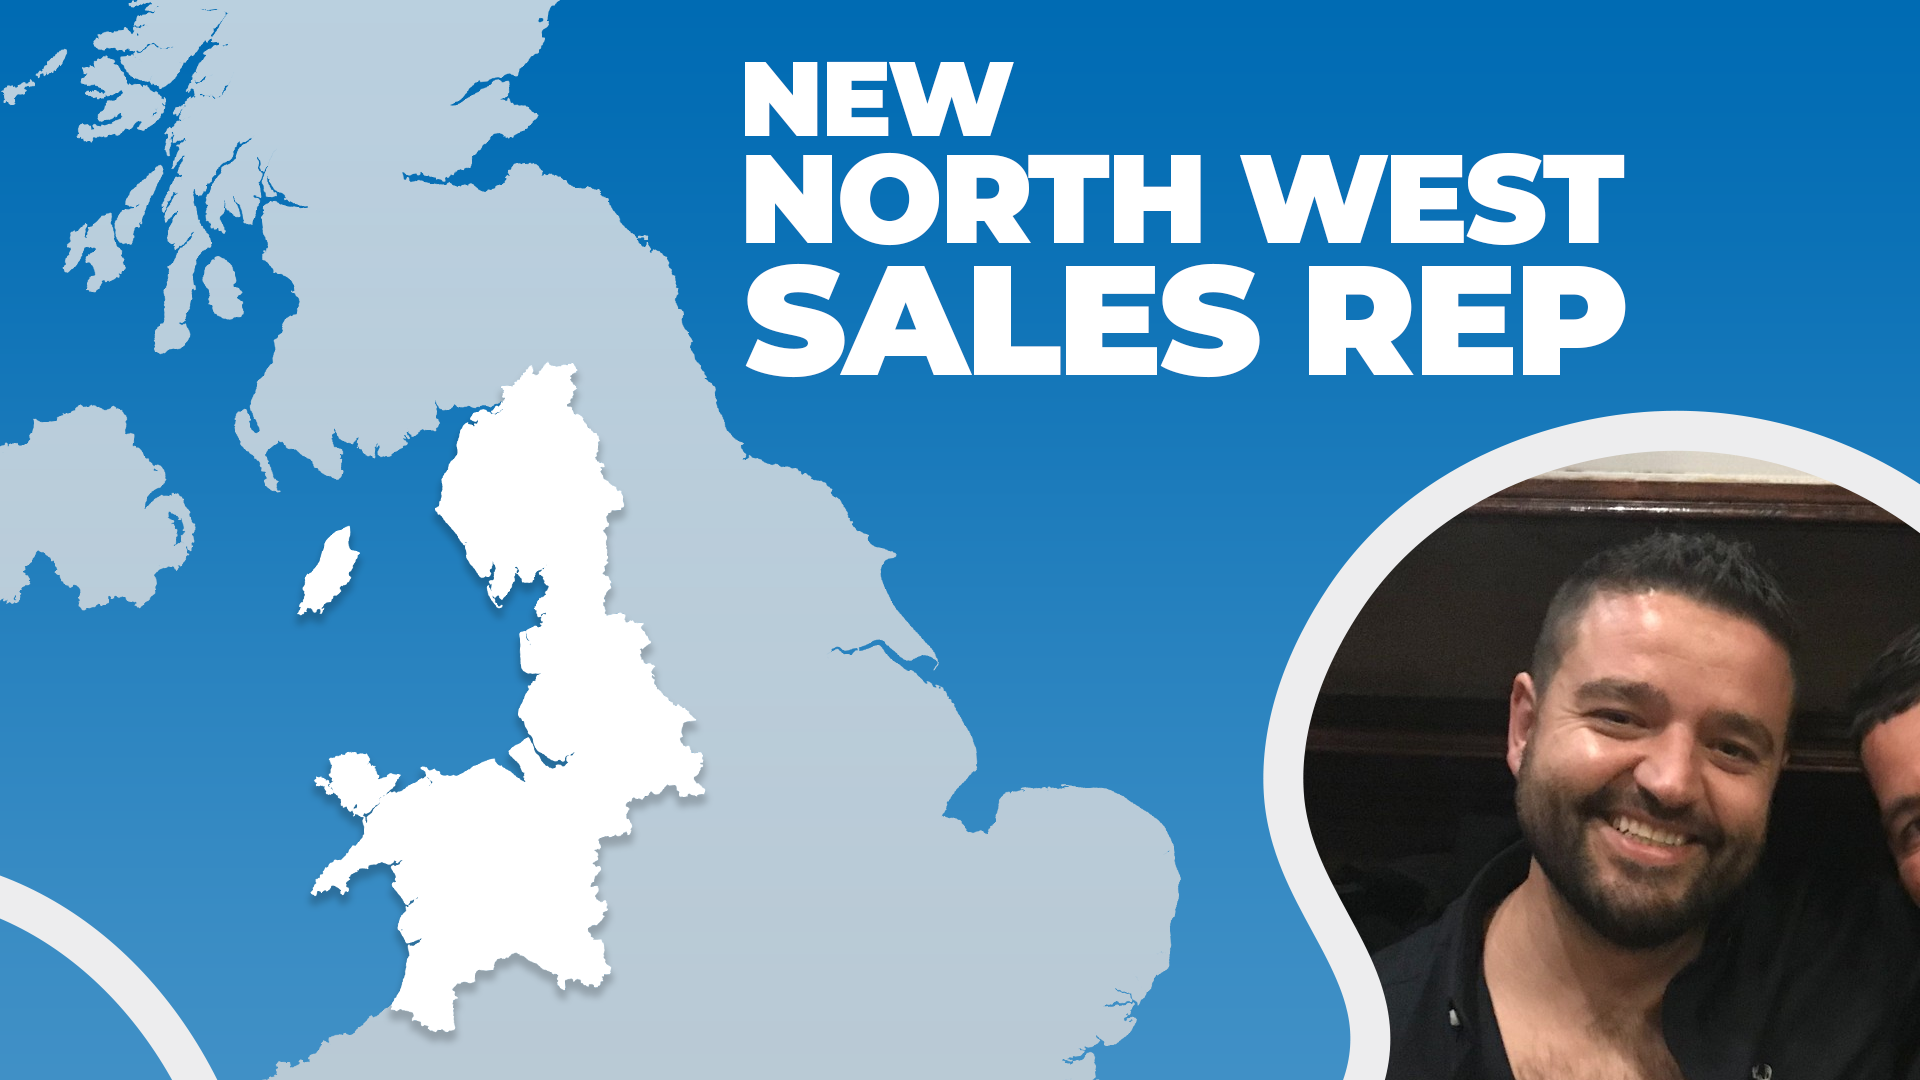 New North West Sales Rep